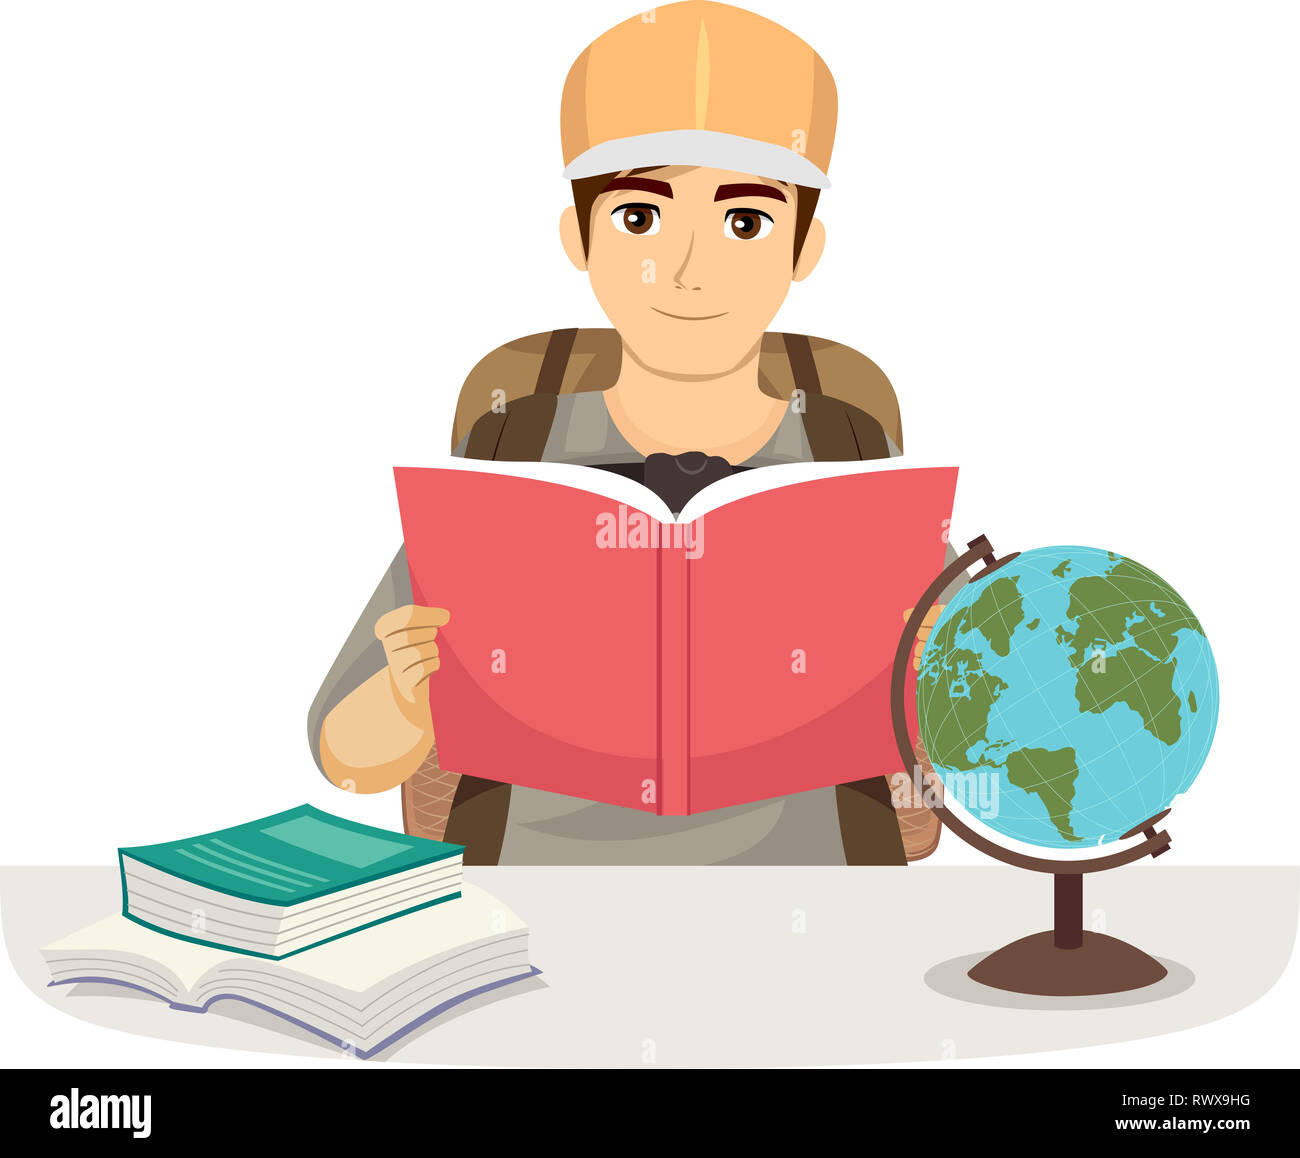 Illustration of a Teenage Guy With Backpack Reading a Book About a Certain Country Stock Photo